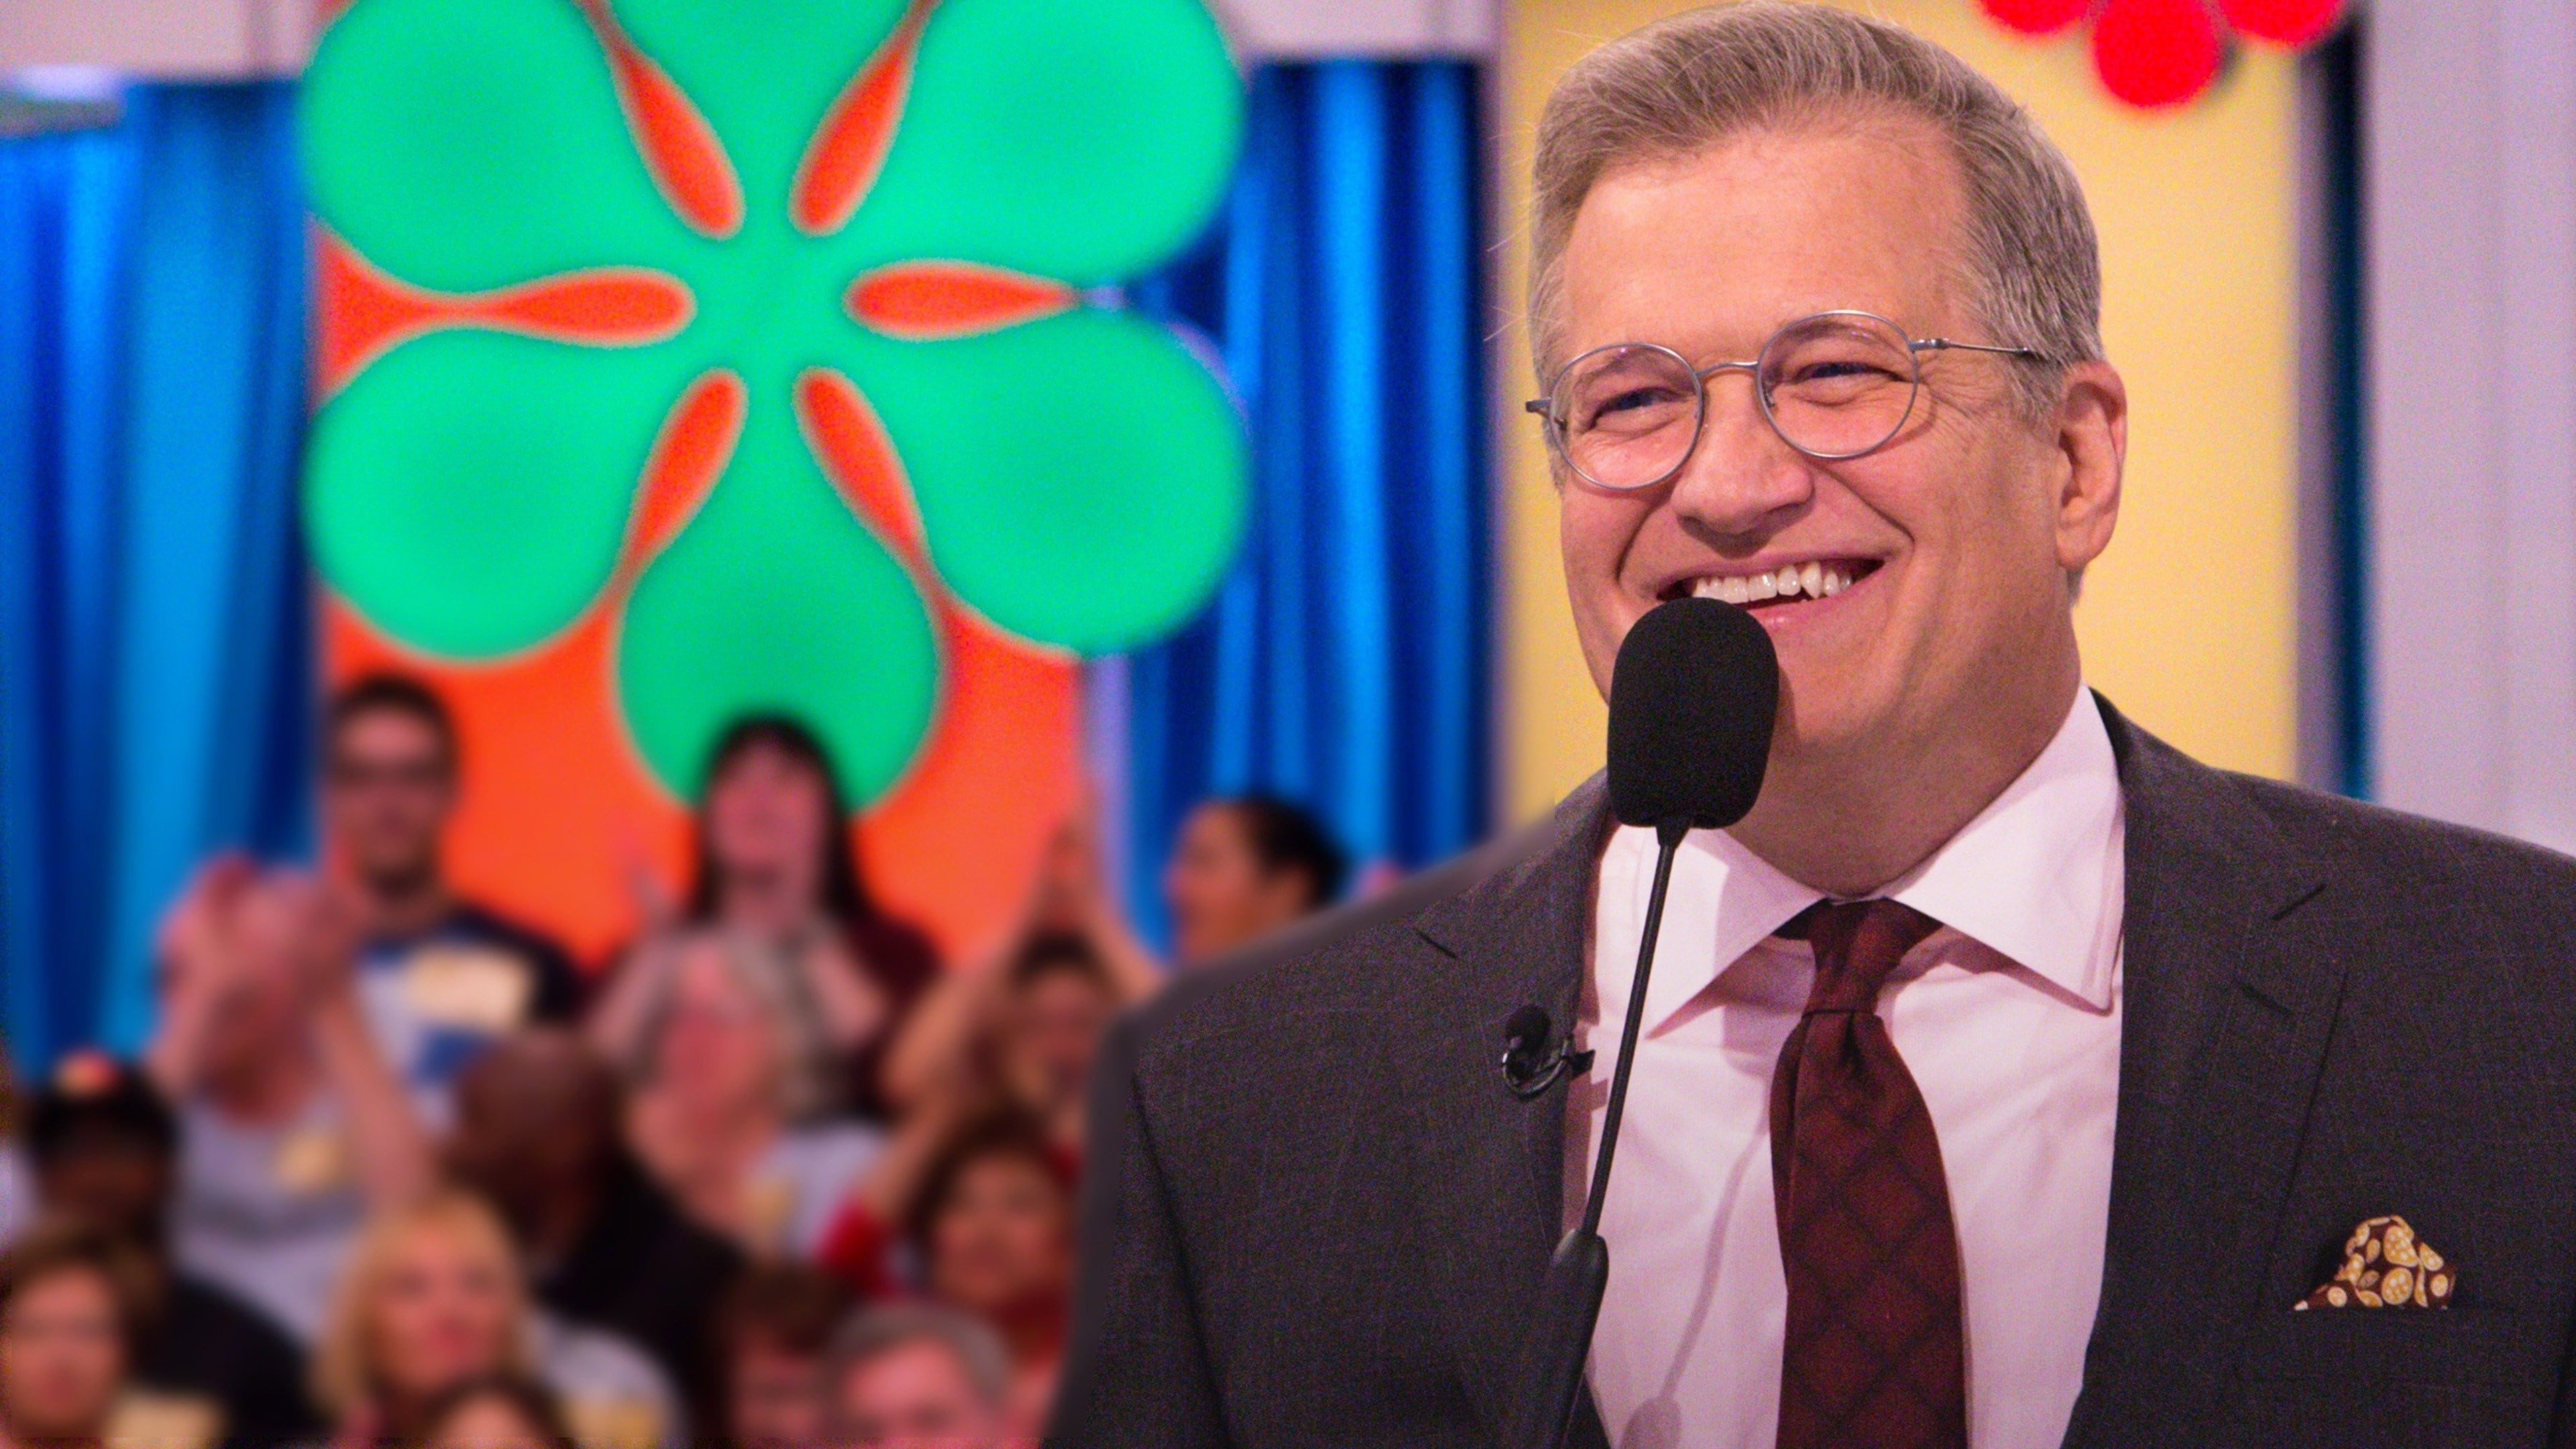 The Price Is Right - Season 1 Episode 124 : The Price Is Right Season 1 Episode 124